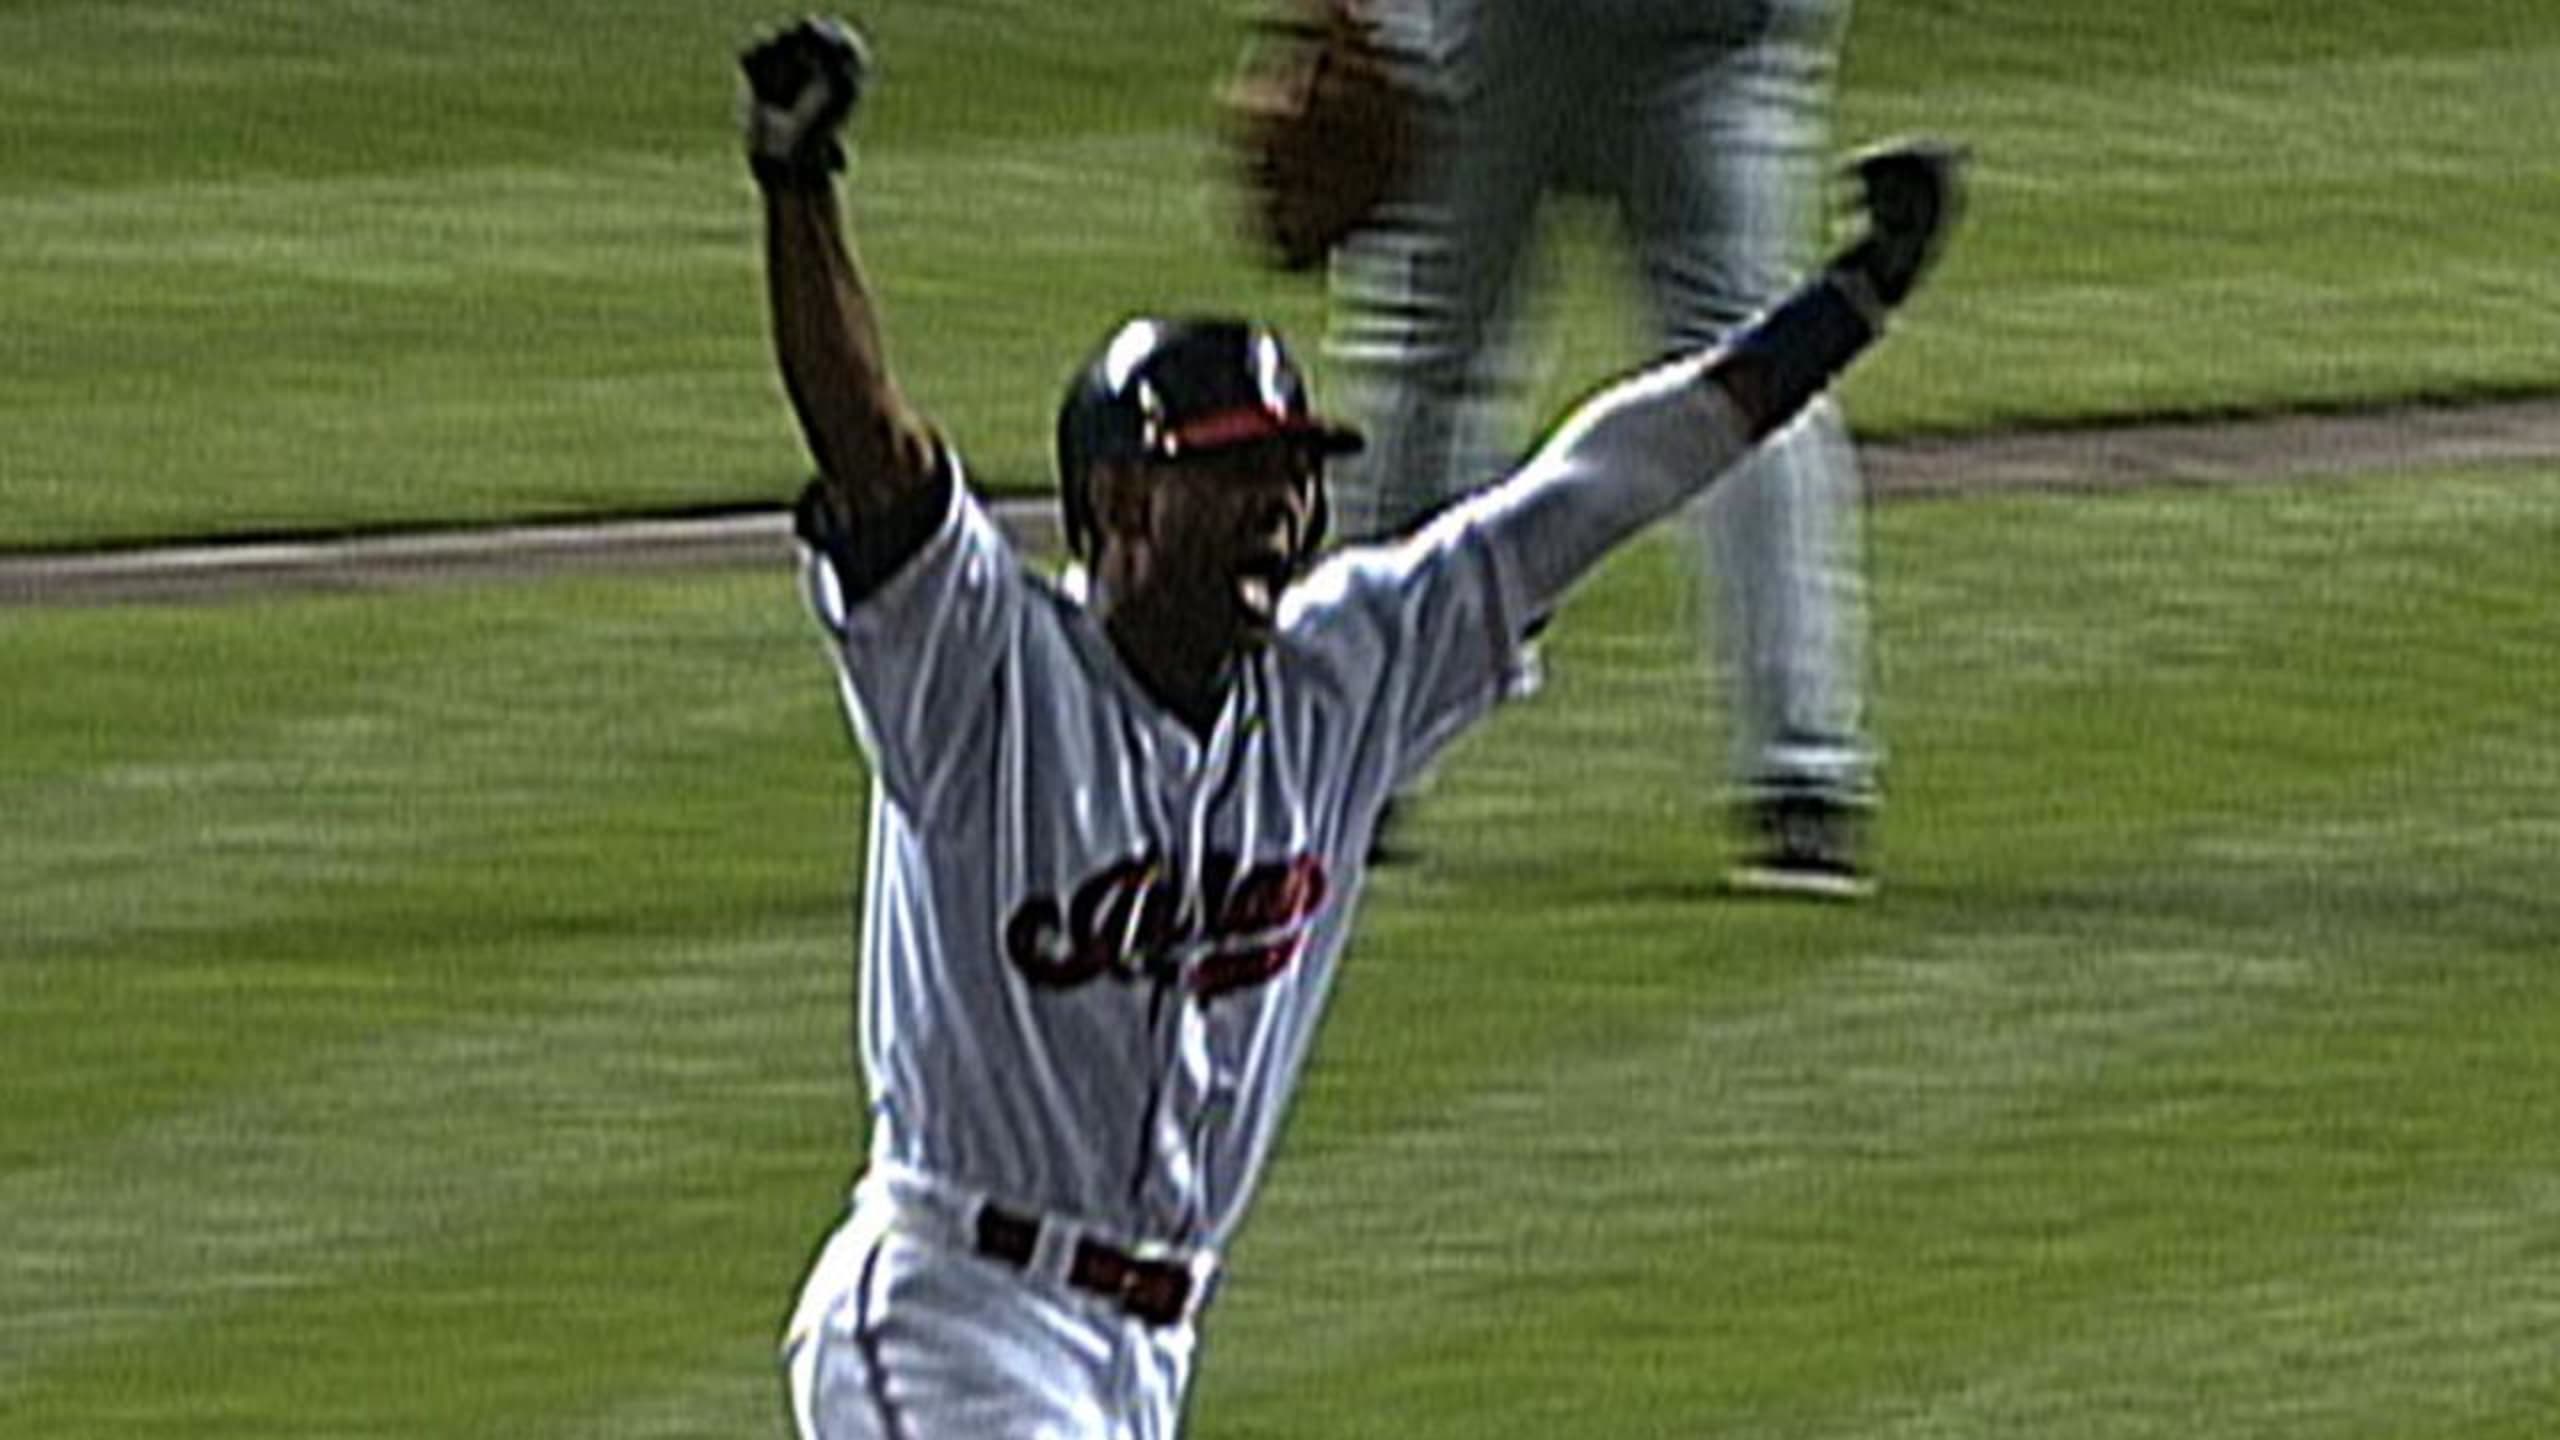 Lofton scores from second,' an oral history: 1995 ALCS Game 6 - Cleveland  Indians 4, Seattle Mariners 0 on Oct. 17, 1995 